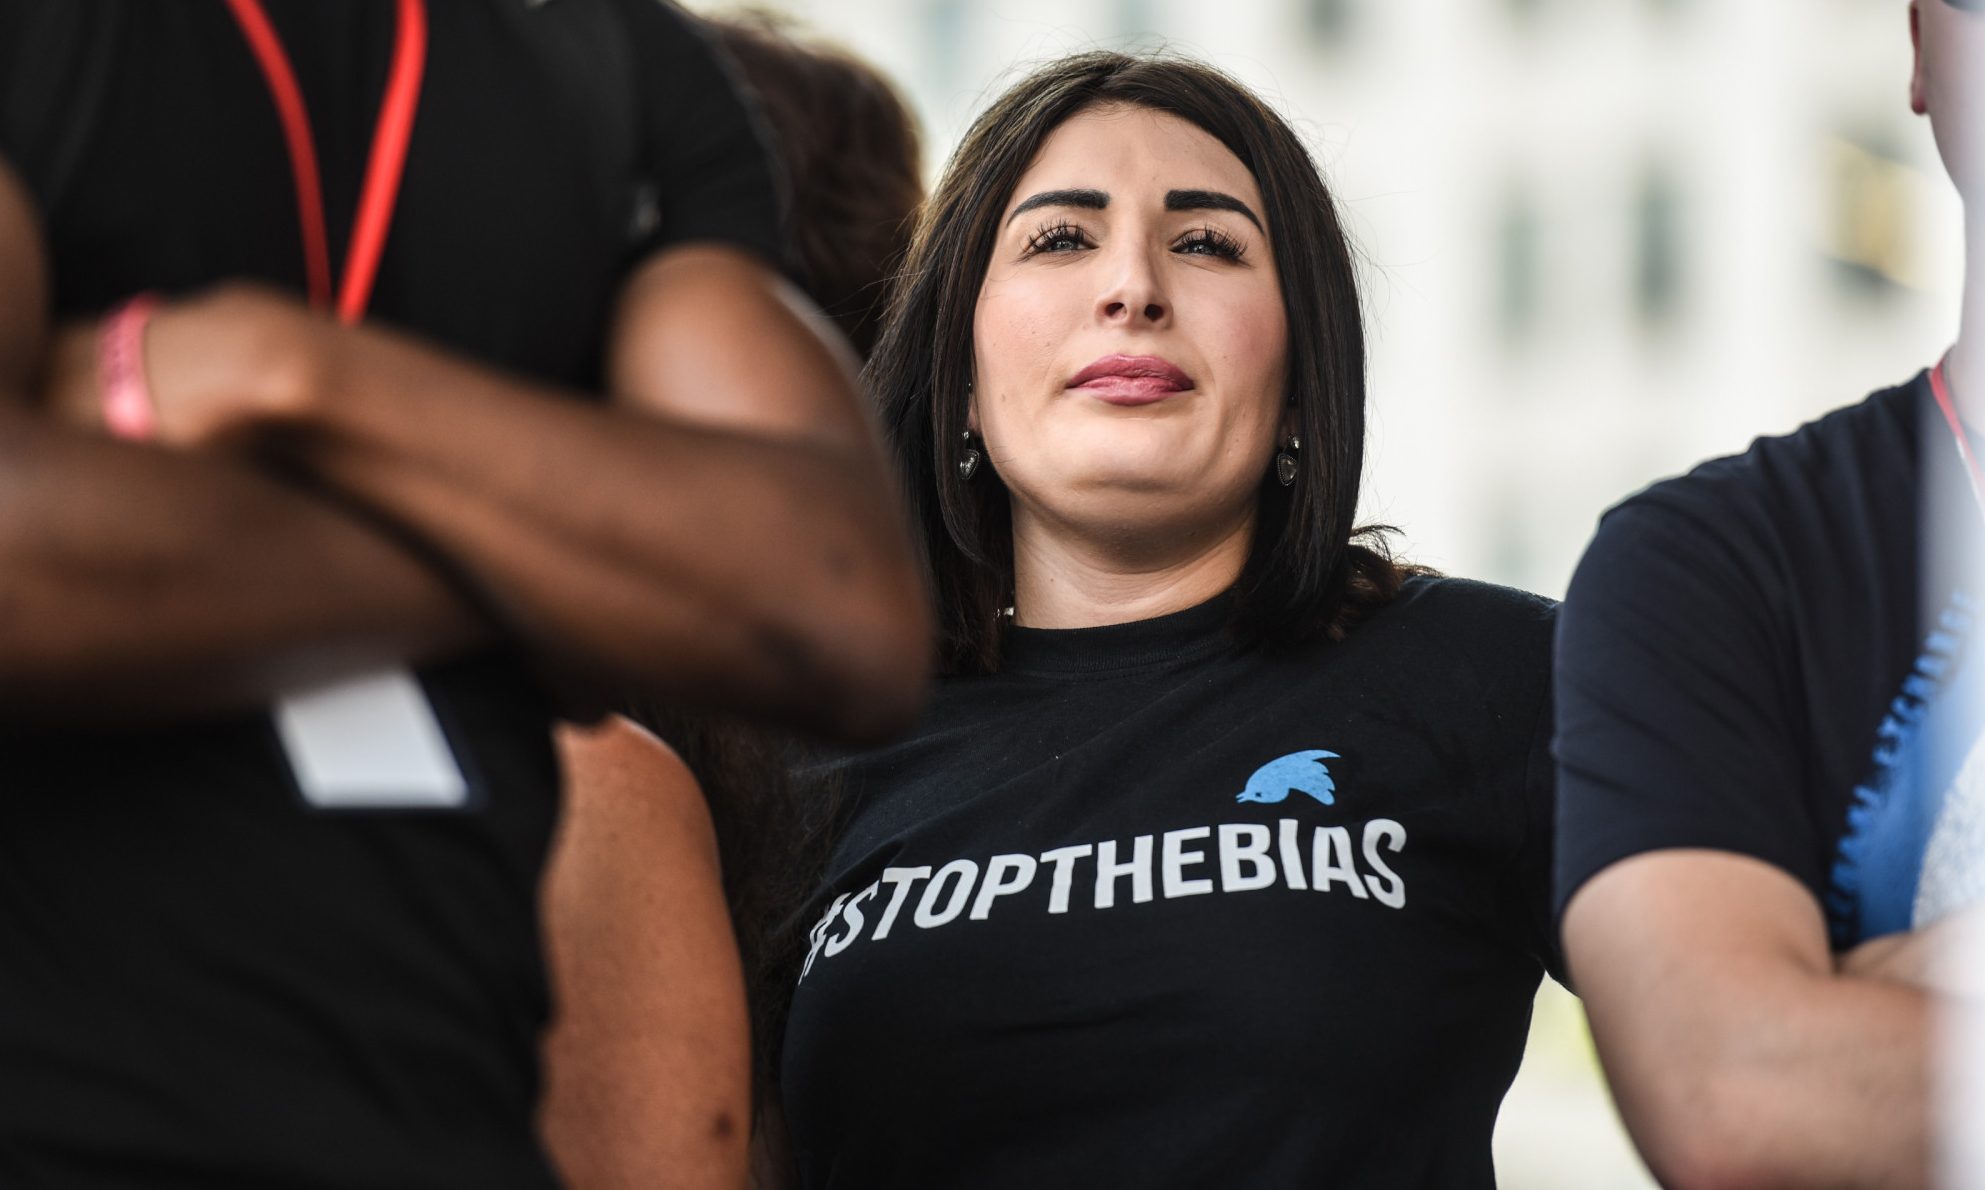 Activist Laura Loomer Wins Florida Primary for US Congressional Seat